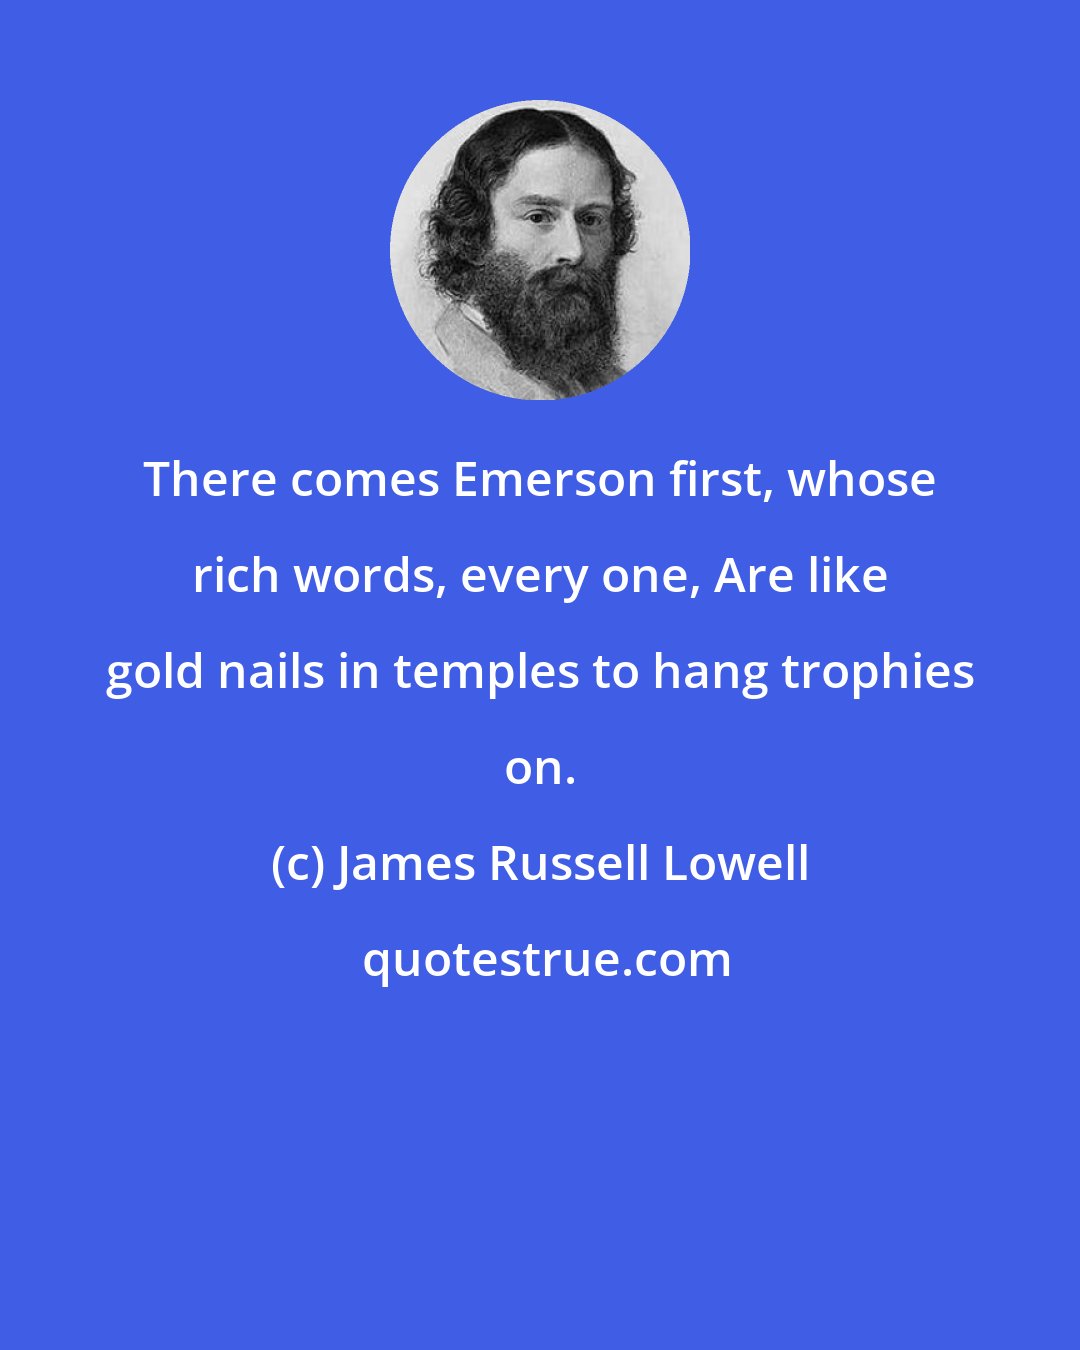 James Russell Lowell: There comes Emerson first, whose rich words, every one, Are like gold nails in temples to hang trophies on.